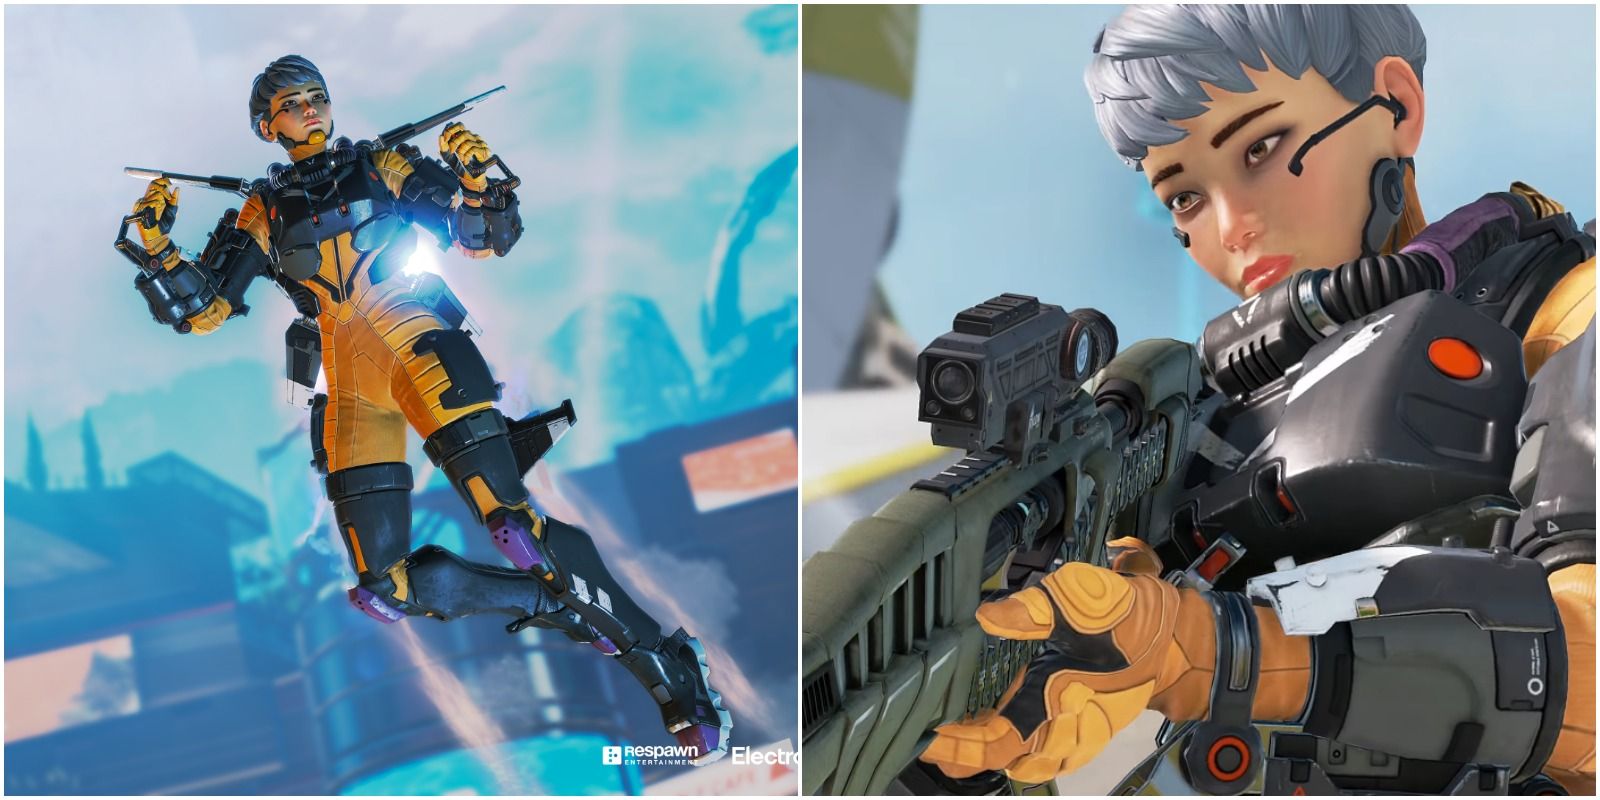 Two images of Valkyrie in Apex Legends